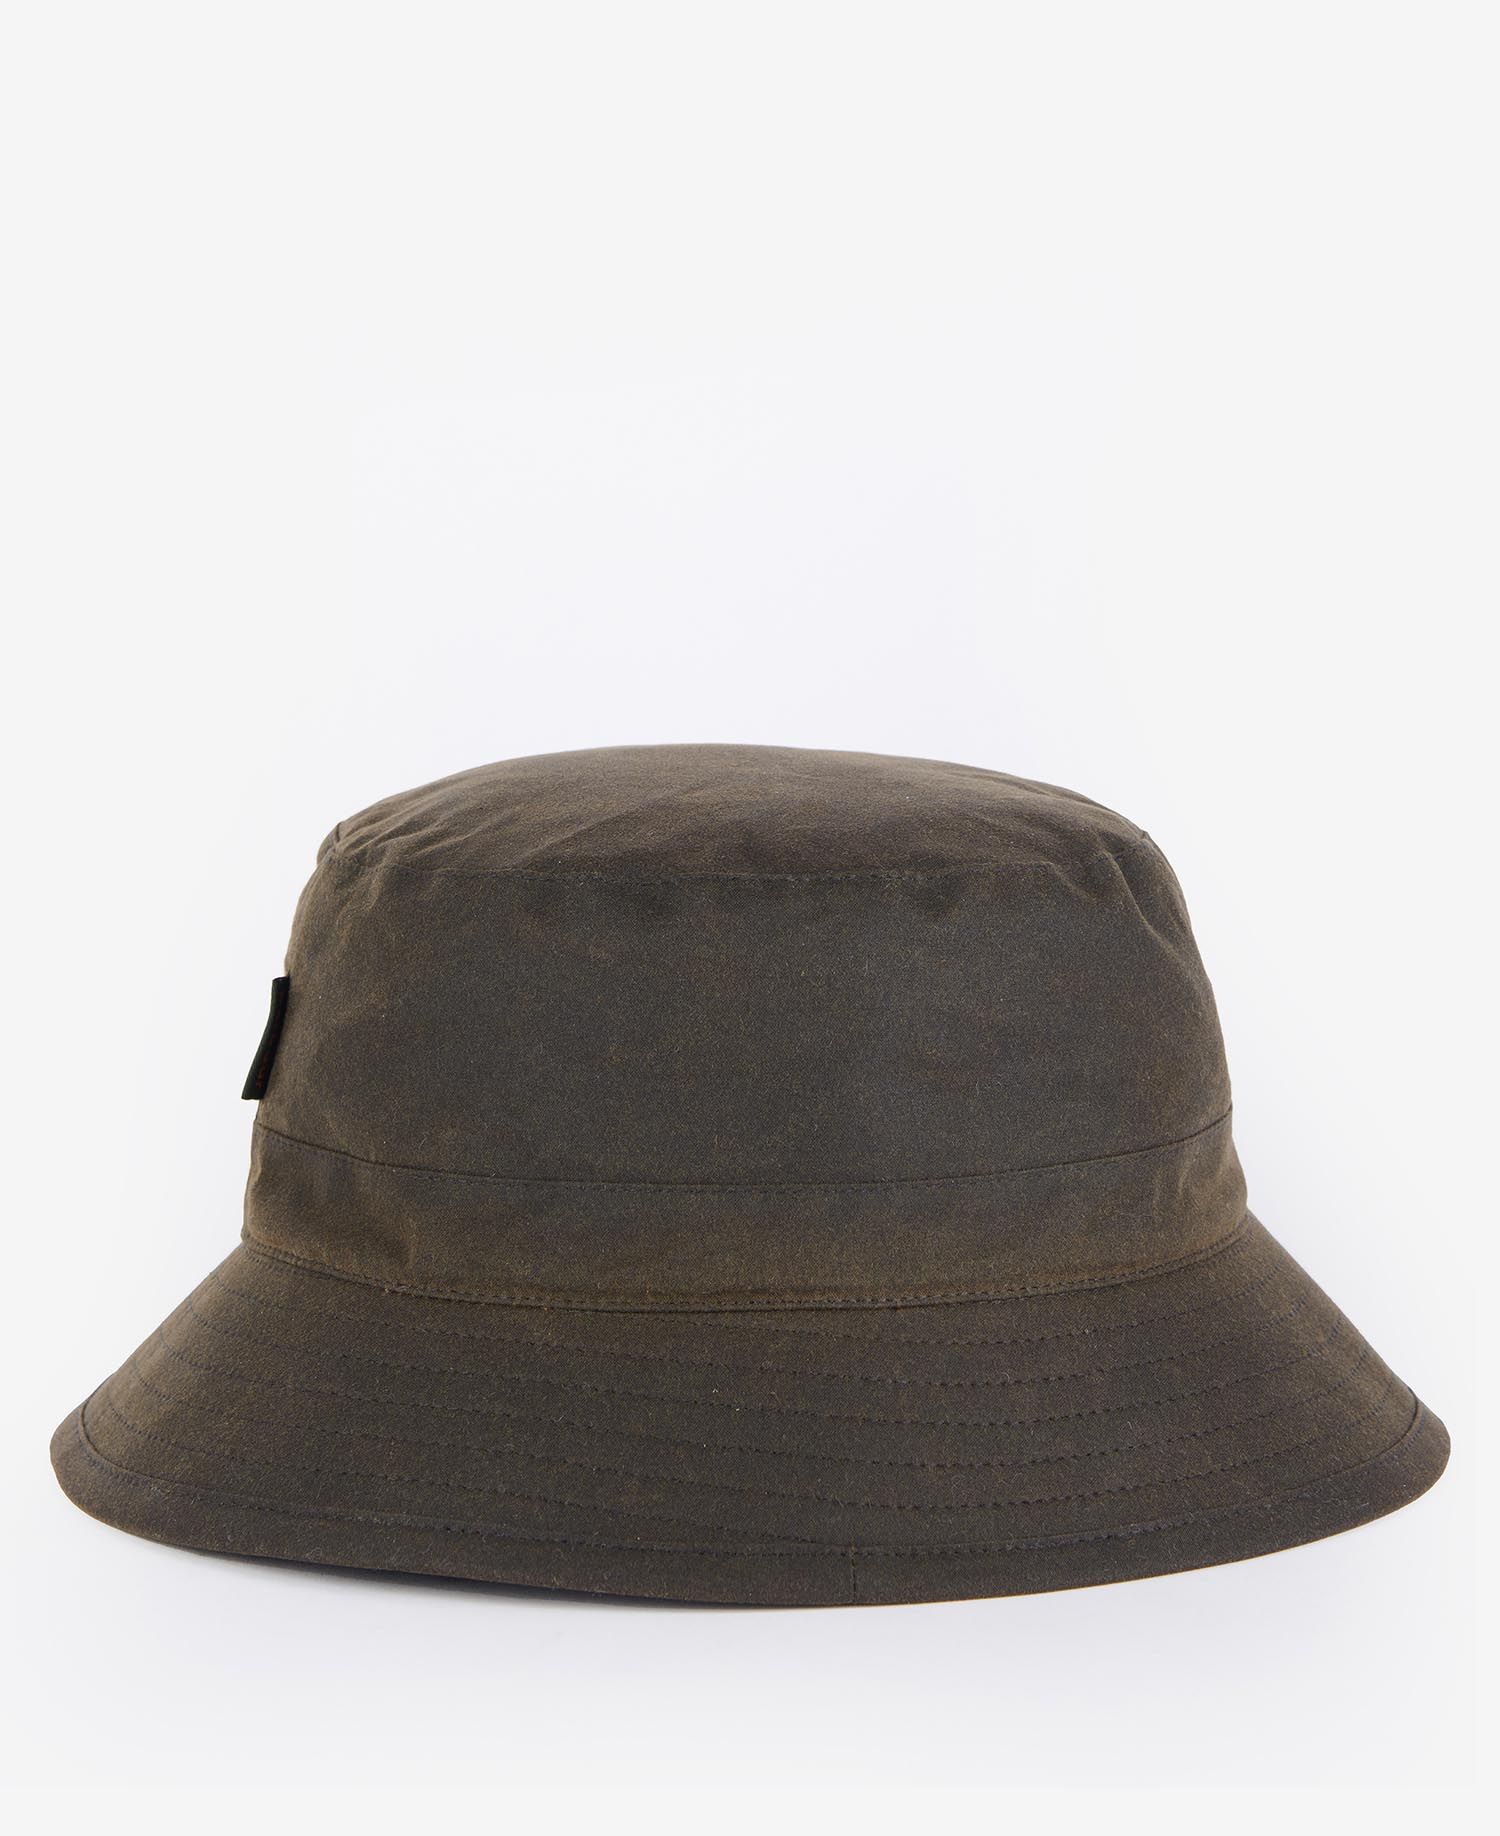 Shop the Barbour Wax Sports Hat here at Barbour. | Barbour